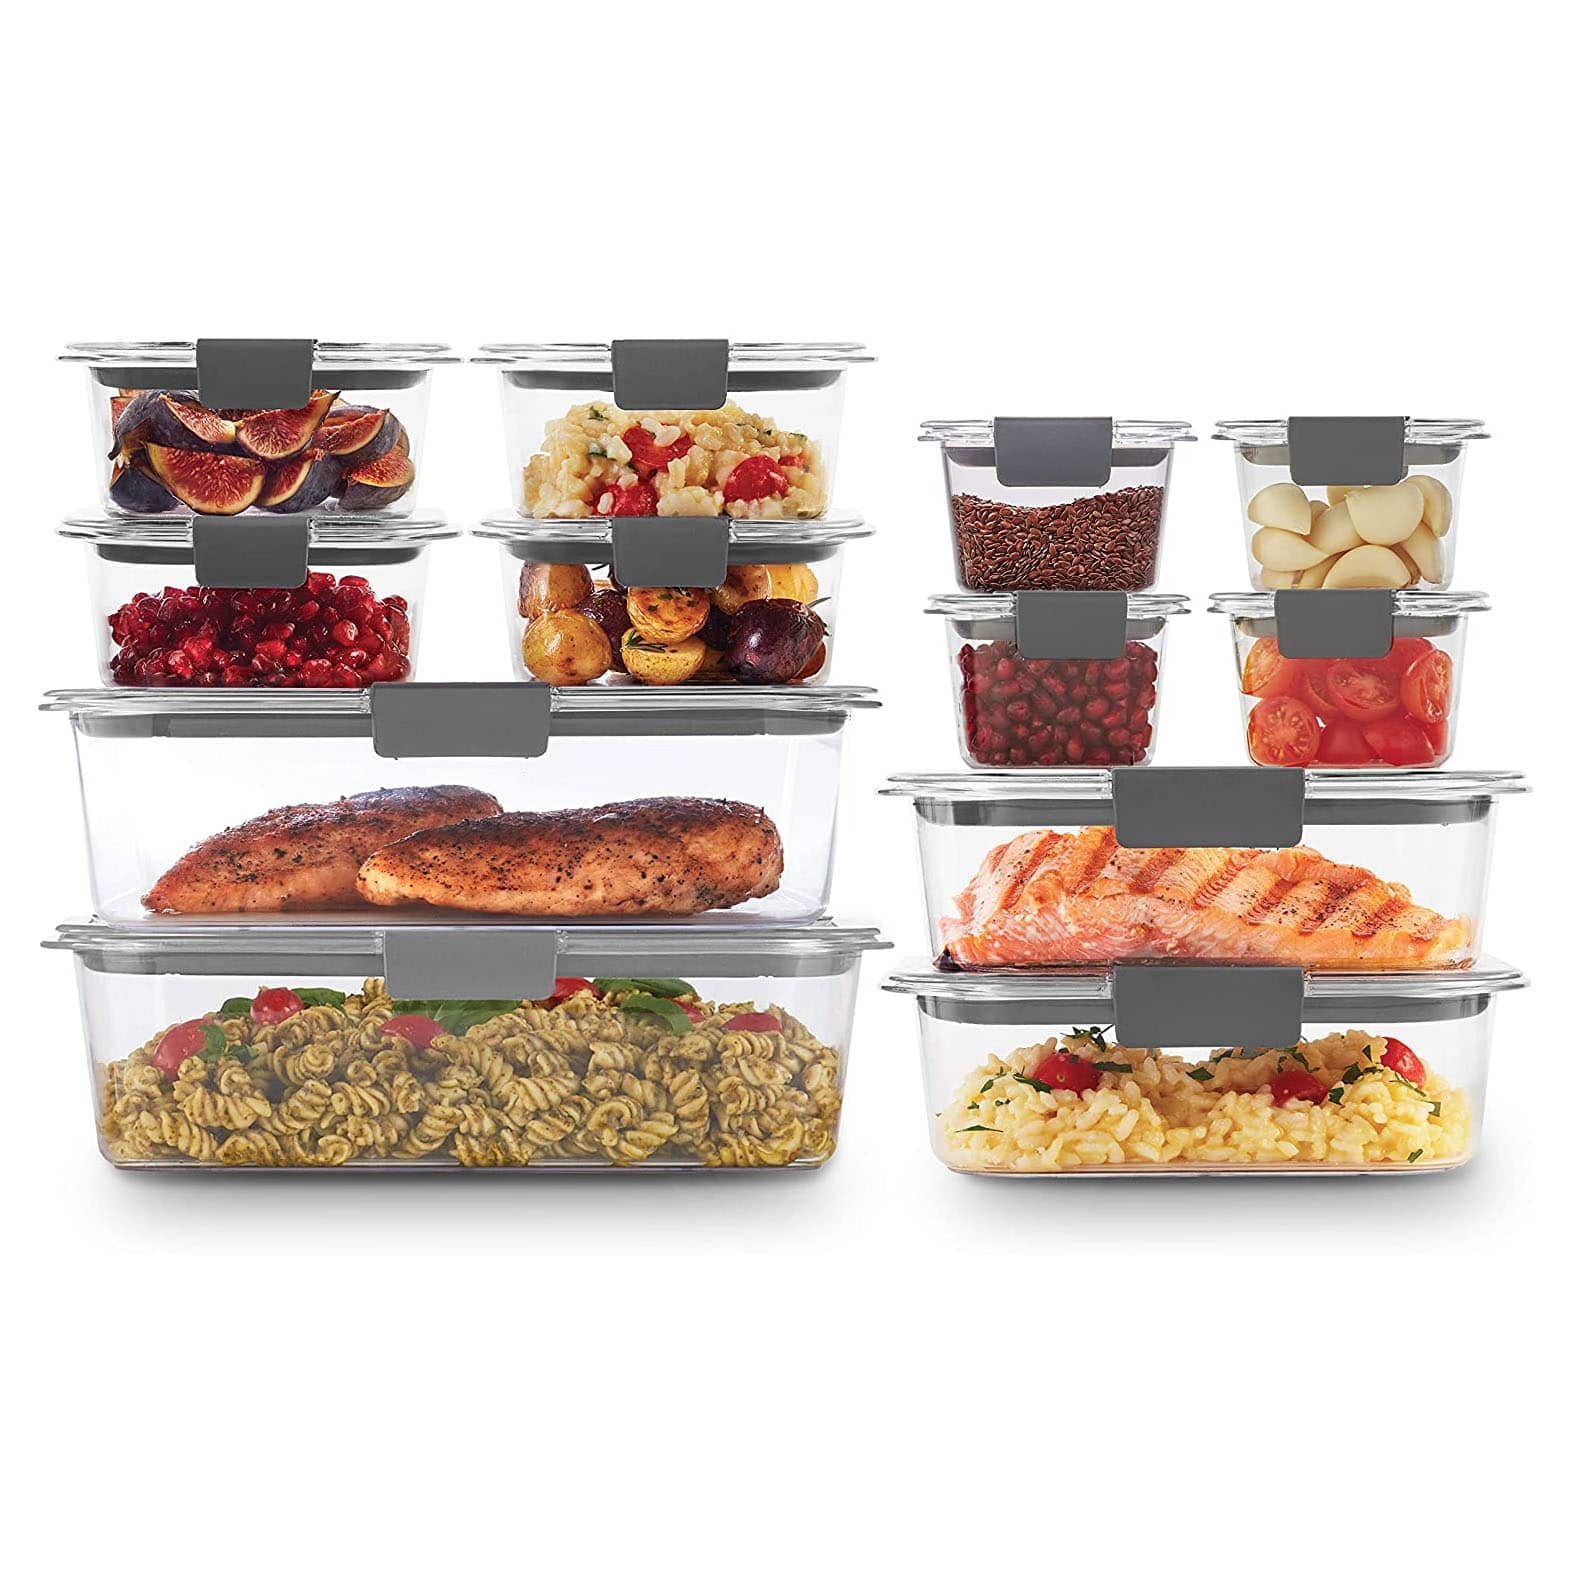 Rubbermaid® Brilliance™ Glass Food Storage Containers Arrive Just in Time  for Thanksgiving